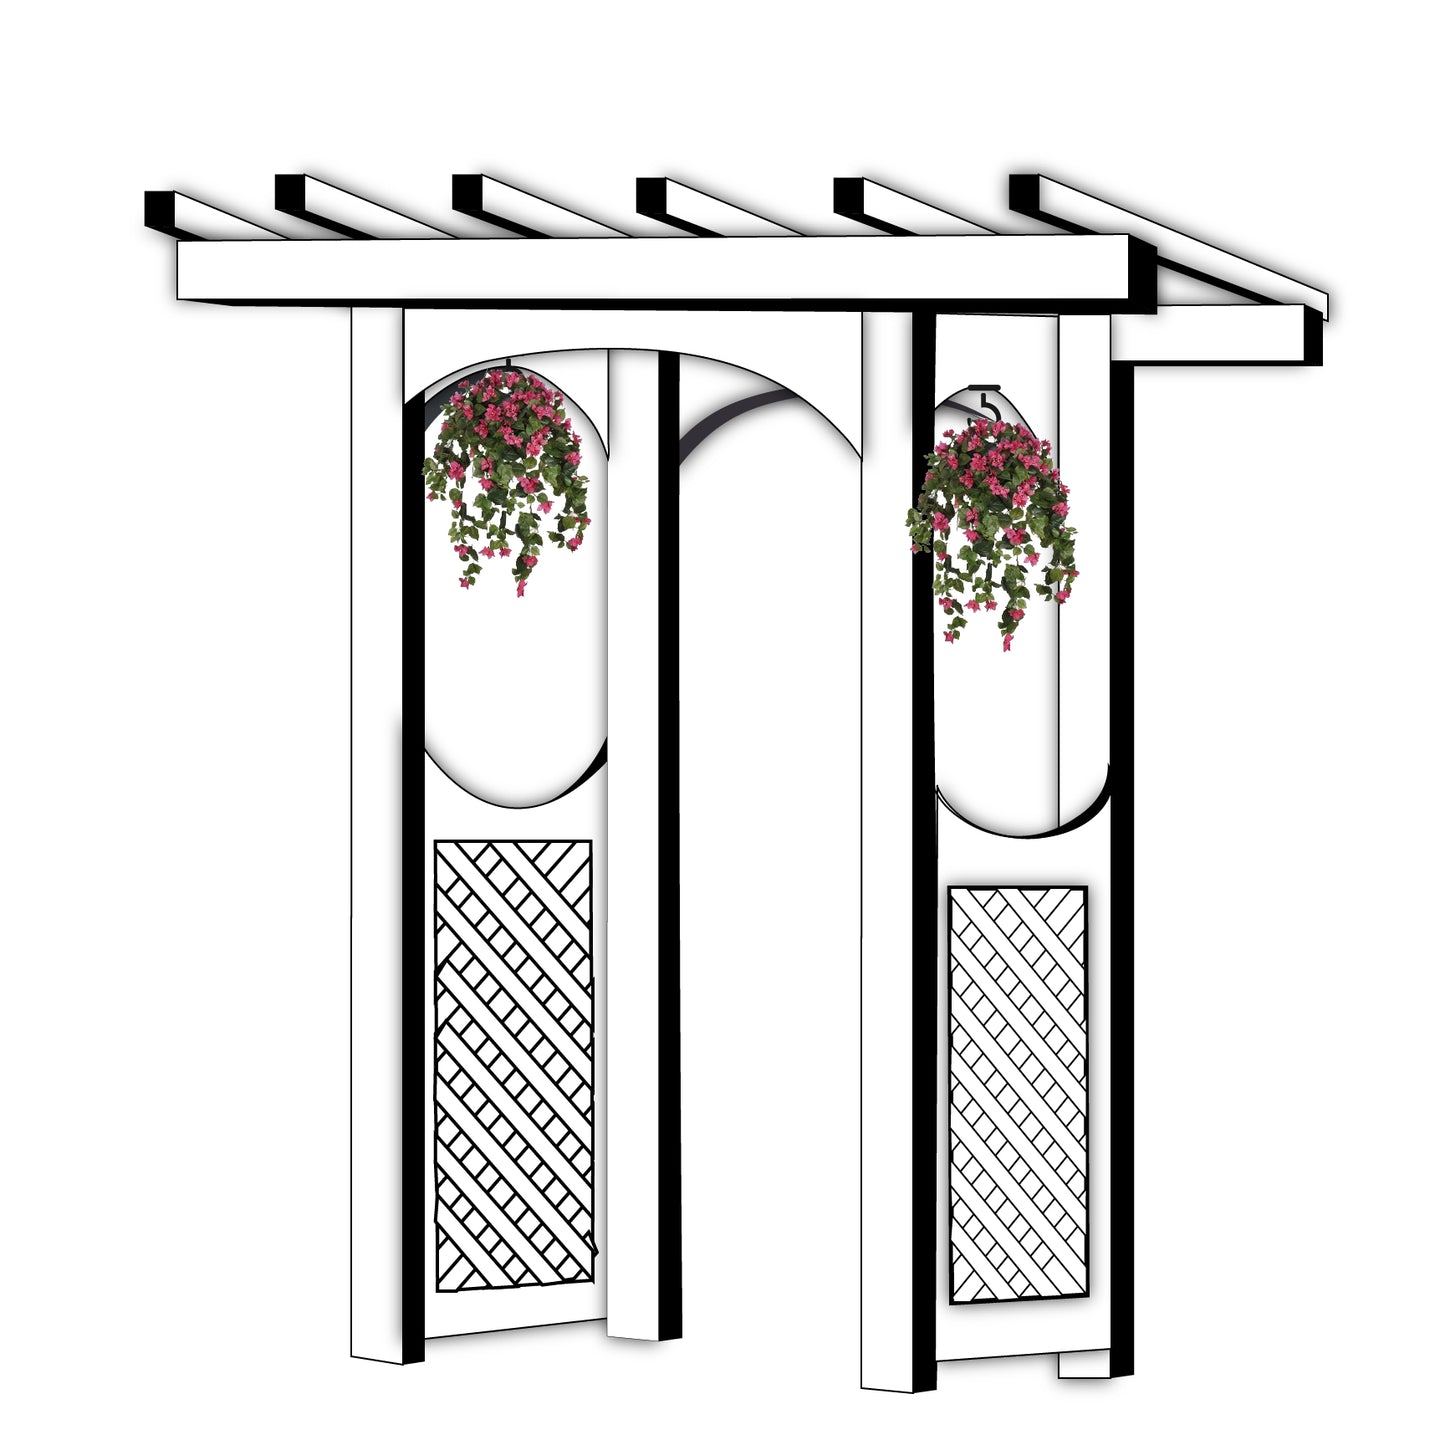 87" Height x 44" Width  x 26" Depth Aluminum Garden Arbor & Plant Holder With Cut Out Laser Picture Panel (Lattice Pattern) -Gates And Benches Are Optional .